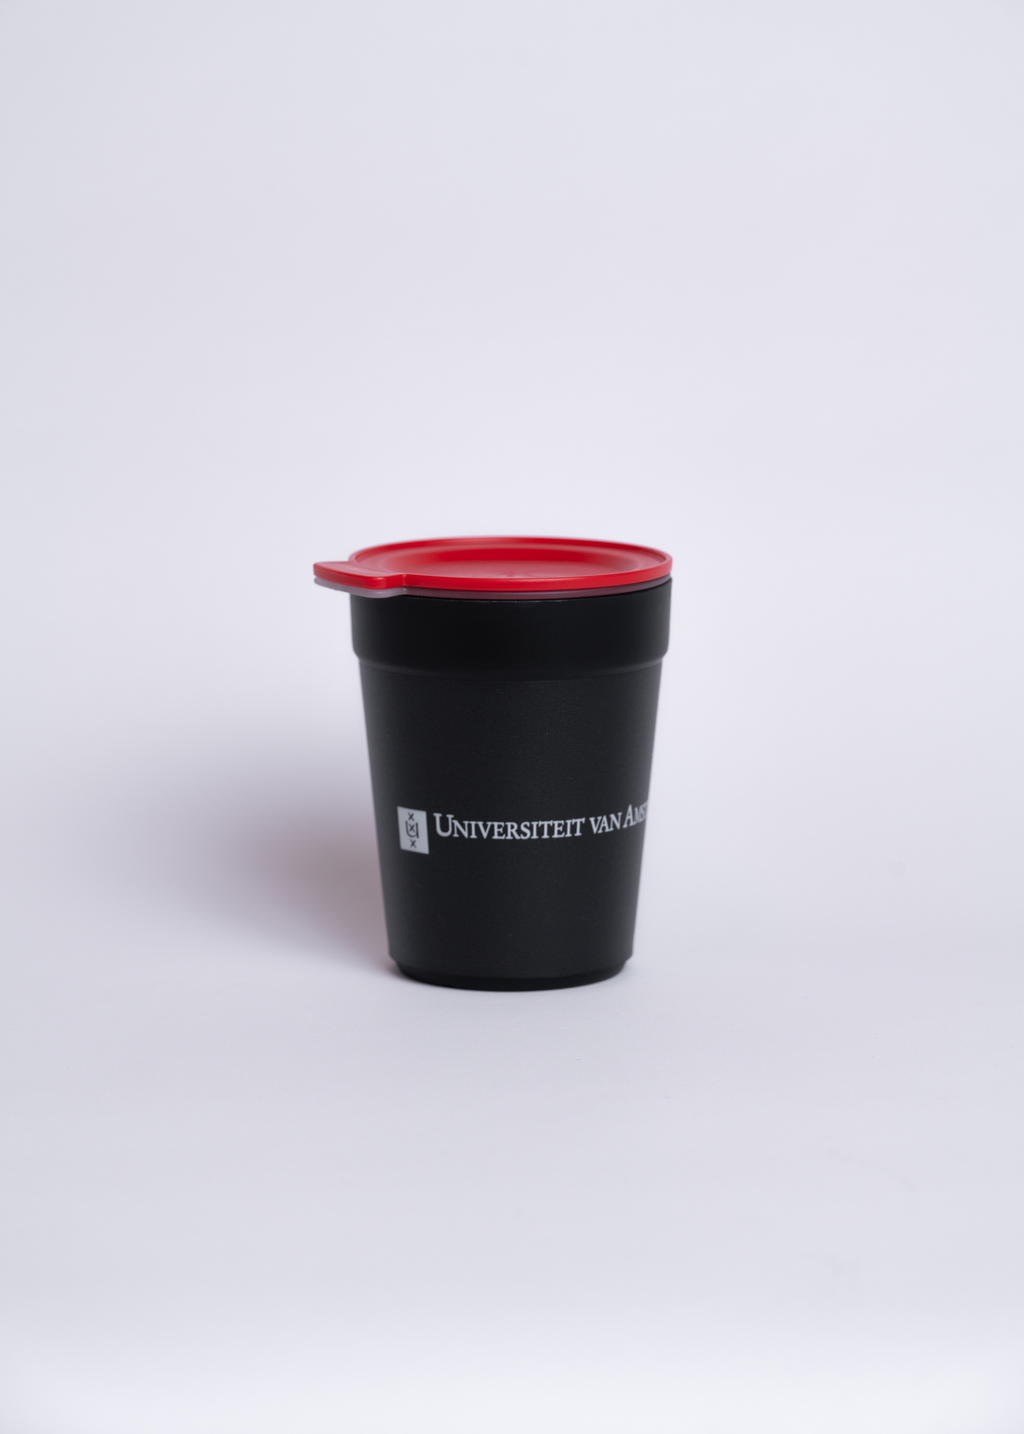 Re-usable cup with red lid